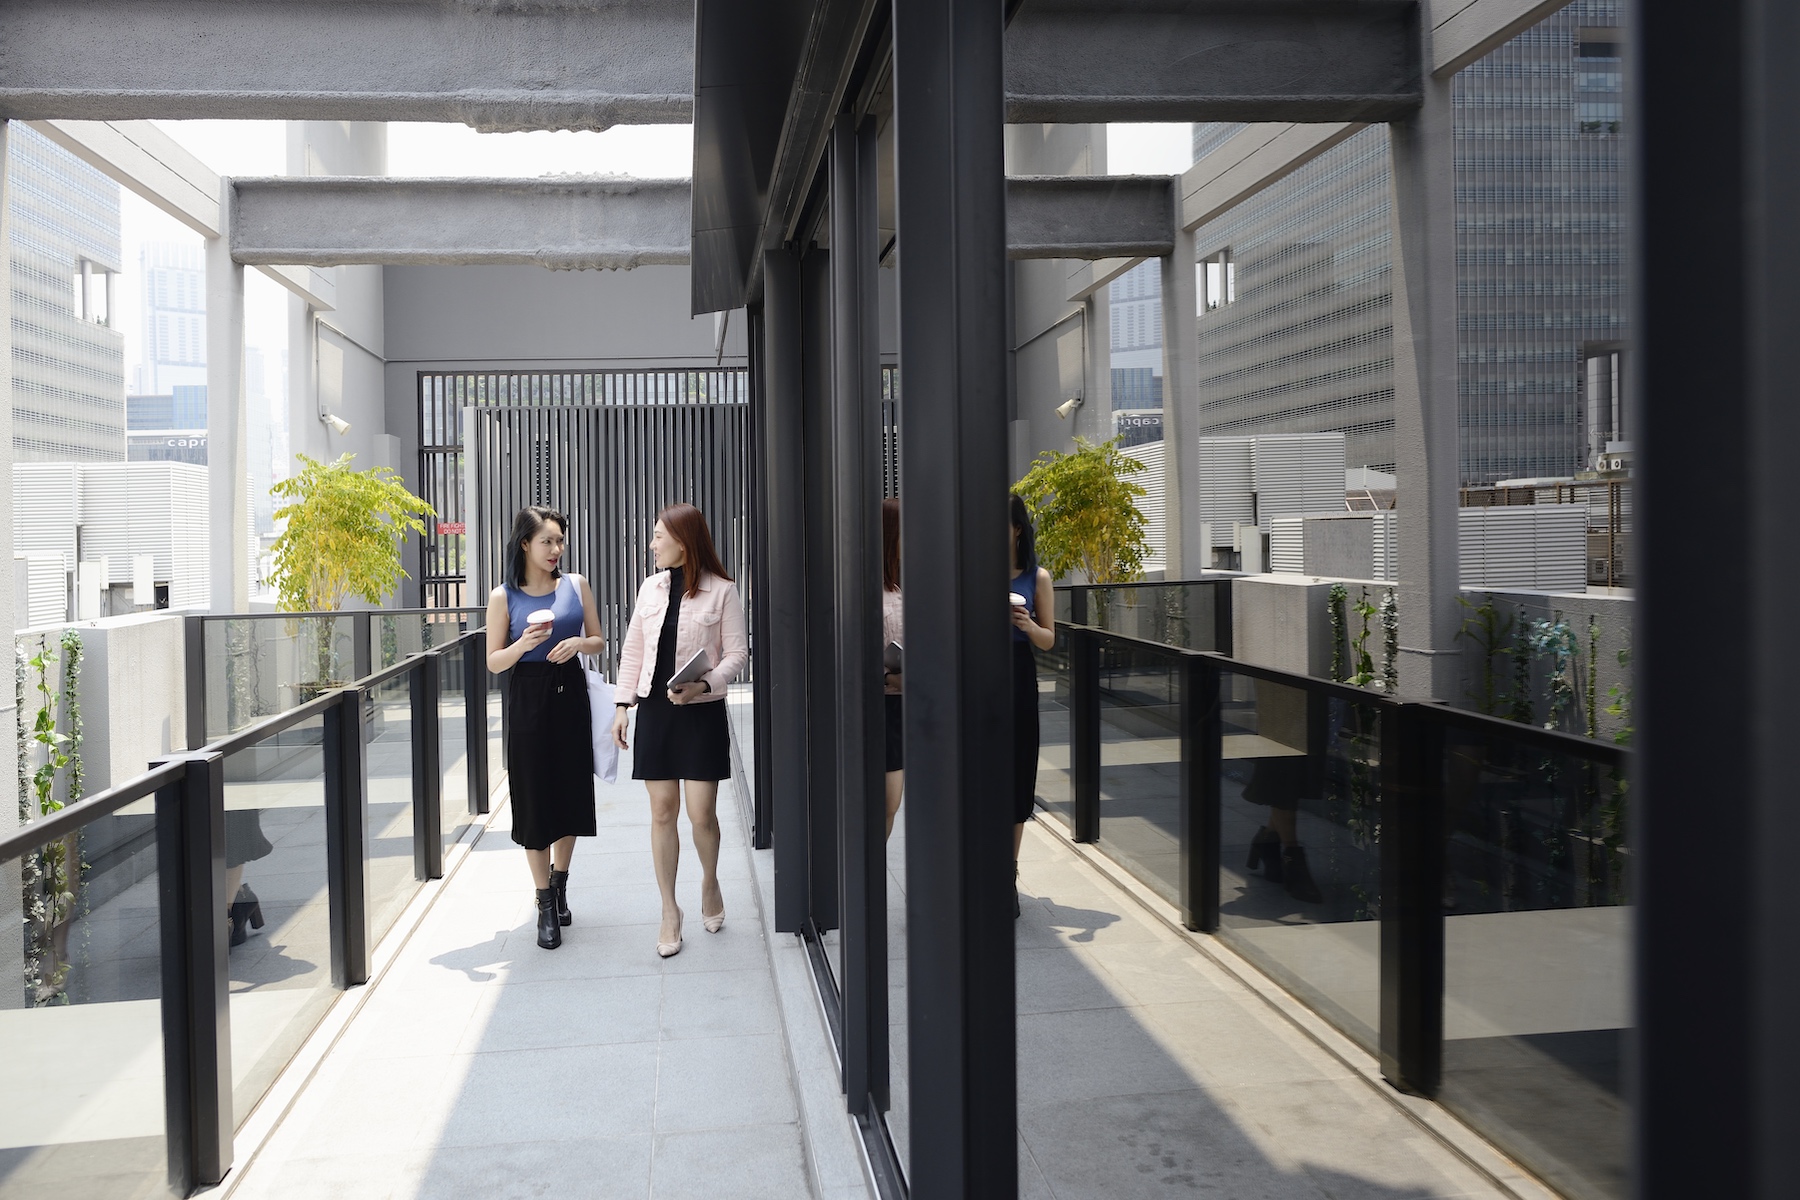 Two women dressed in business casual walk to a meeting together through their office's outdoor walkway